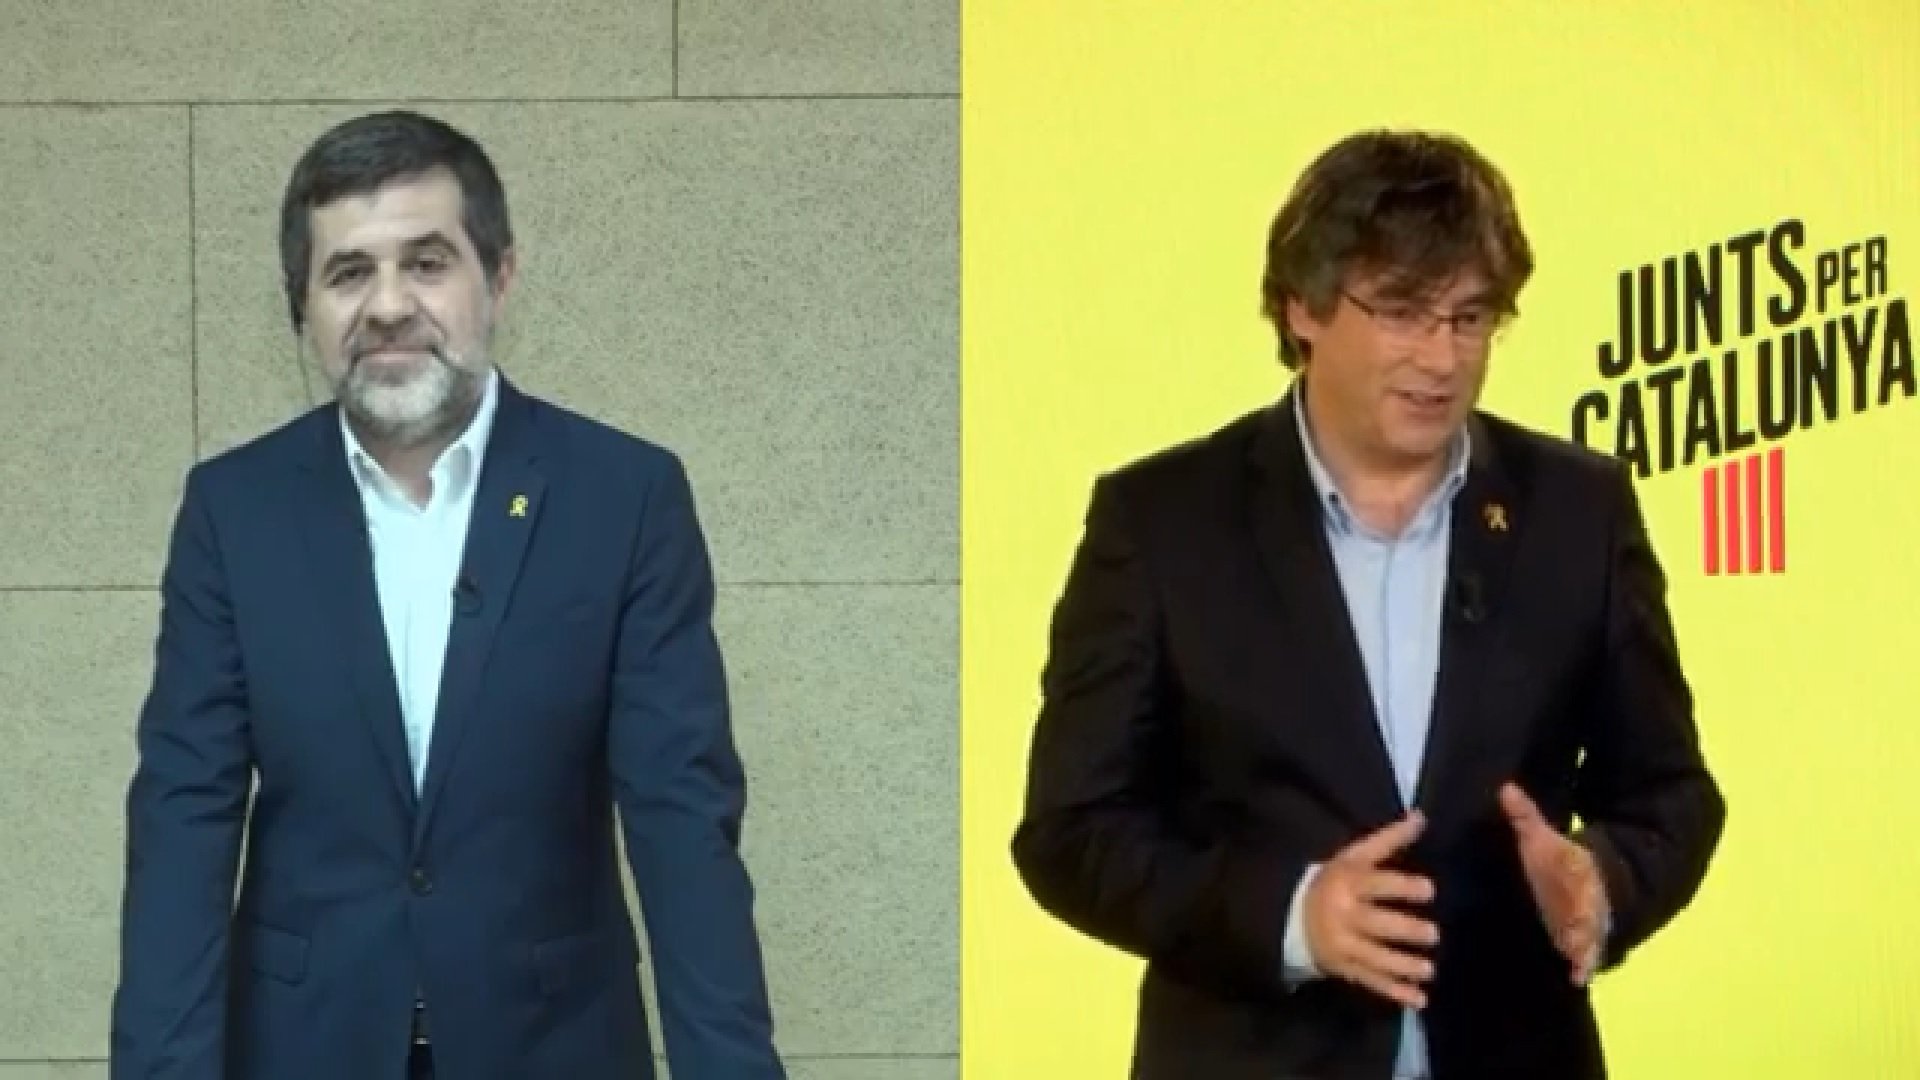 Cs, PP try to prevent Puigdemont standing in the European election